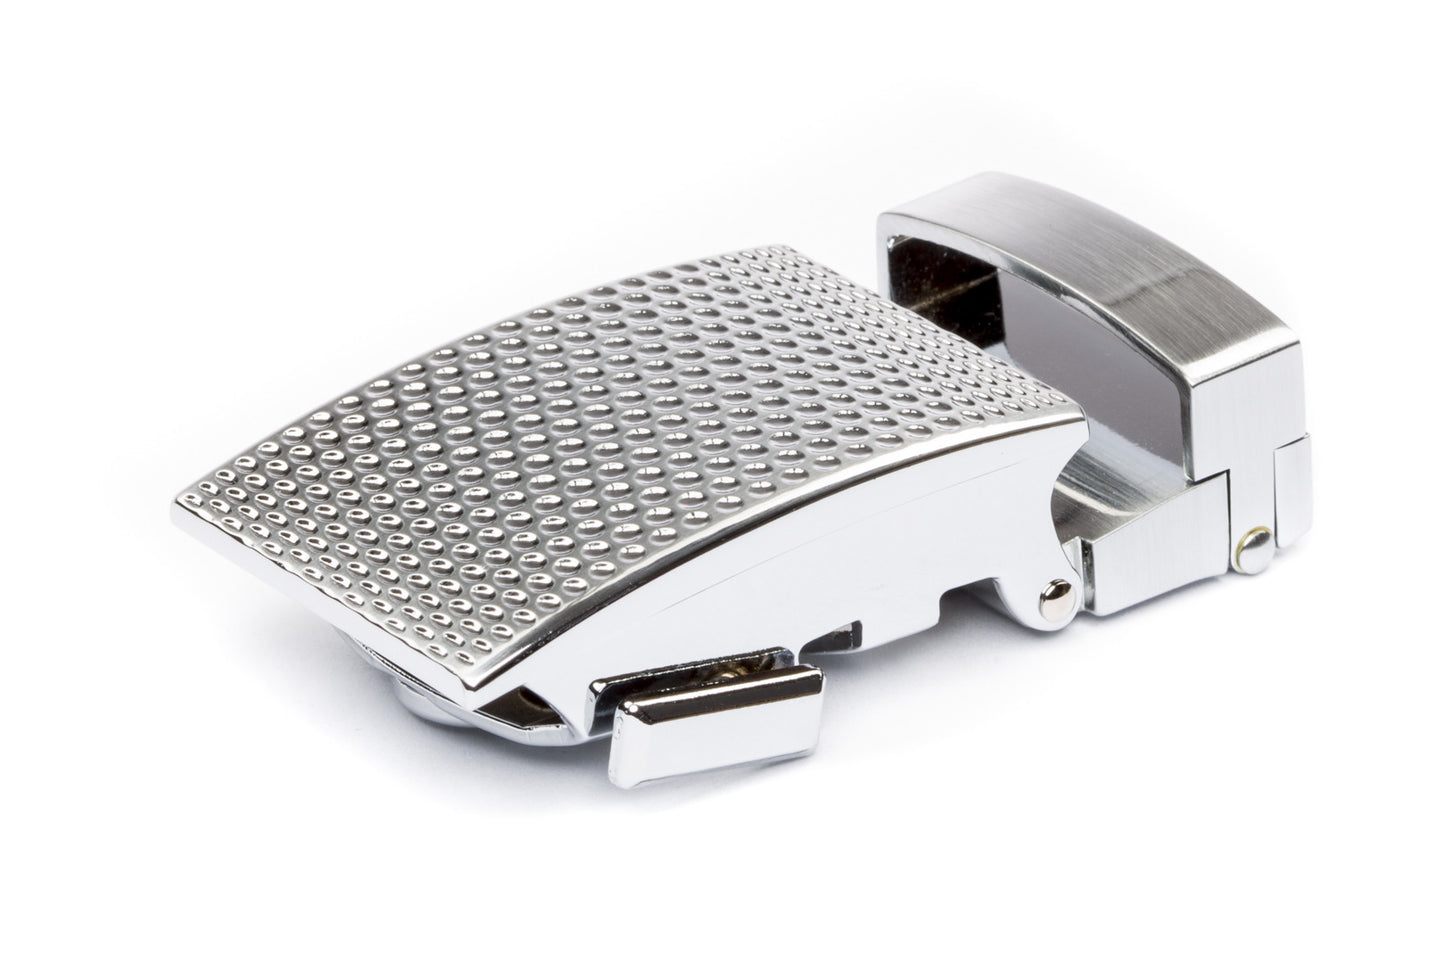 Men's golf ratchet belt buckle in silver with a 1.25-inch width.